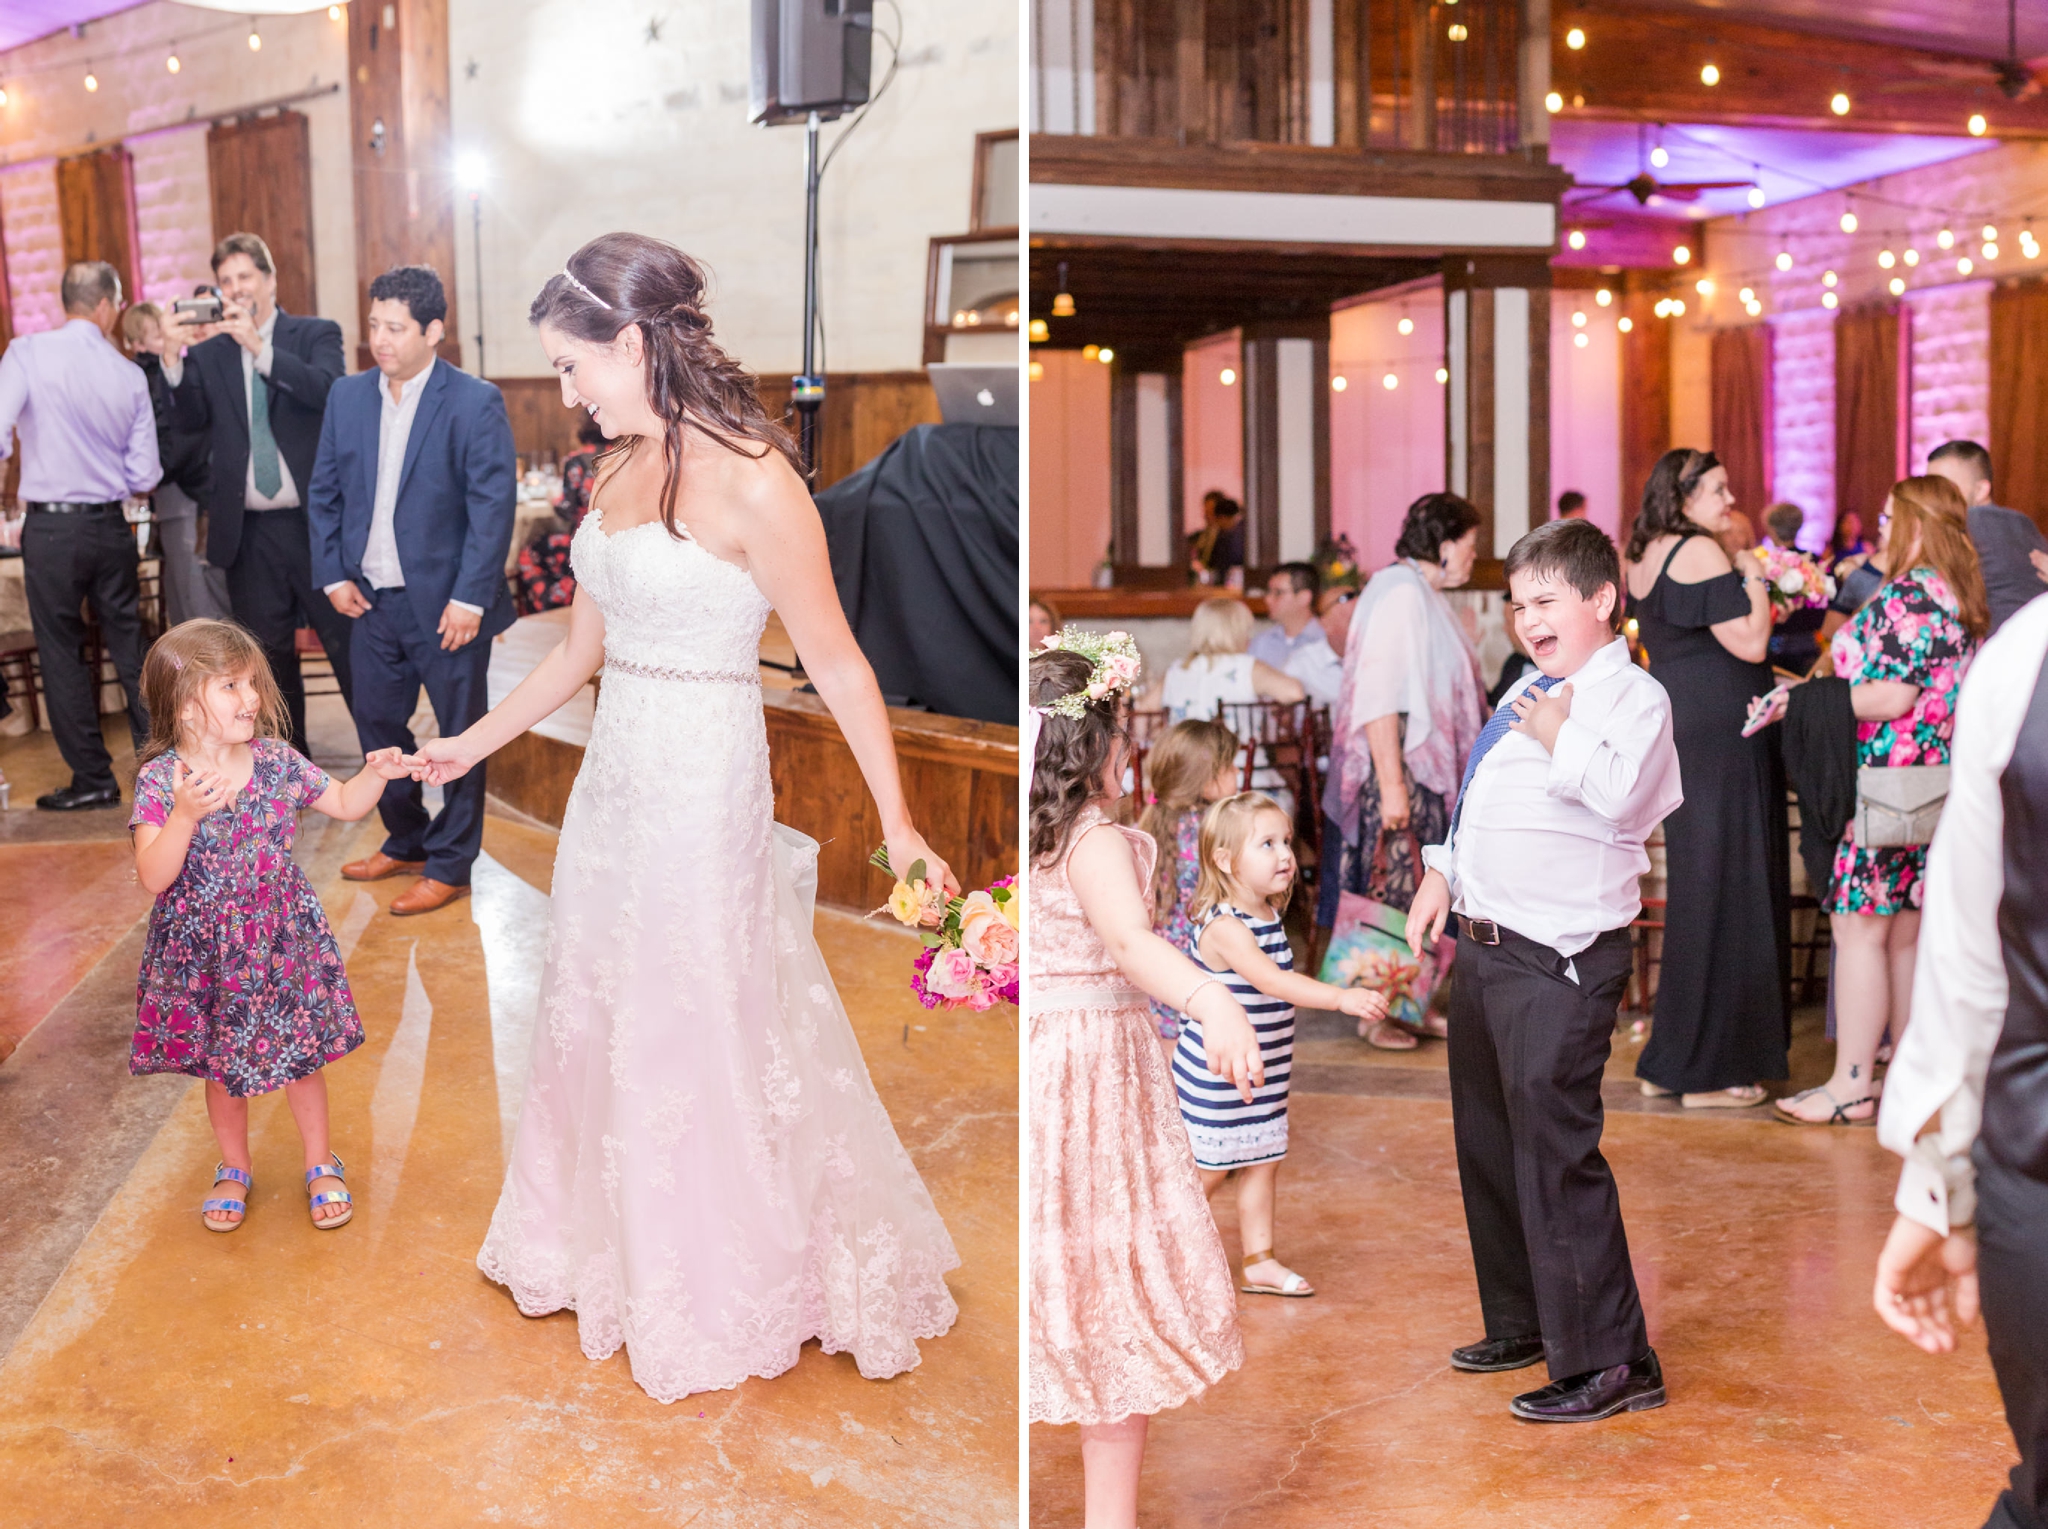 A Pink and Coral Wedding at The Oaks at Heavenly in Helotes, TX by Dawn Elizabeth Studios, San Antonio Wedding Photographer